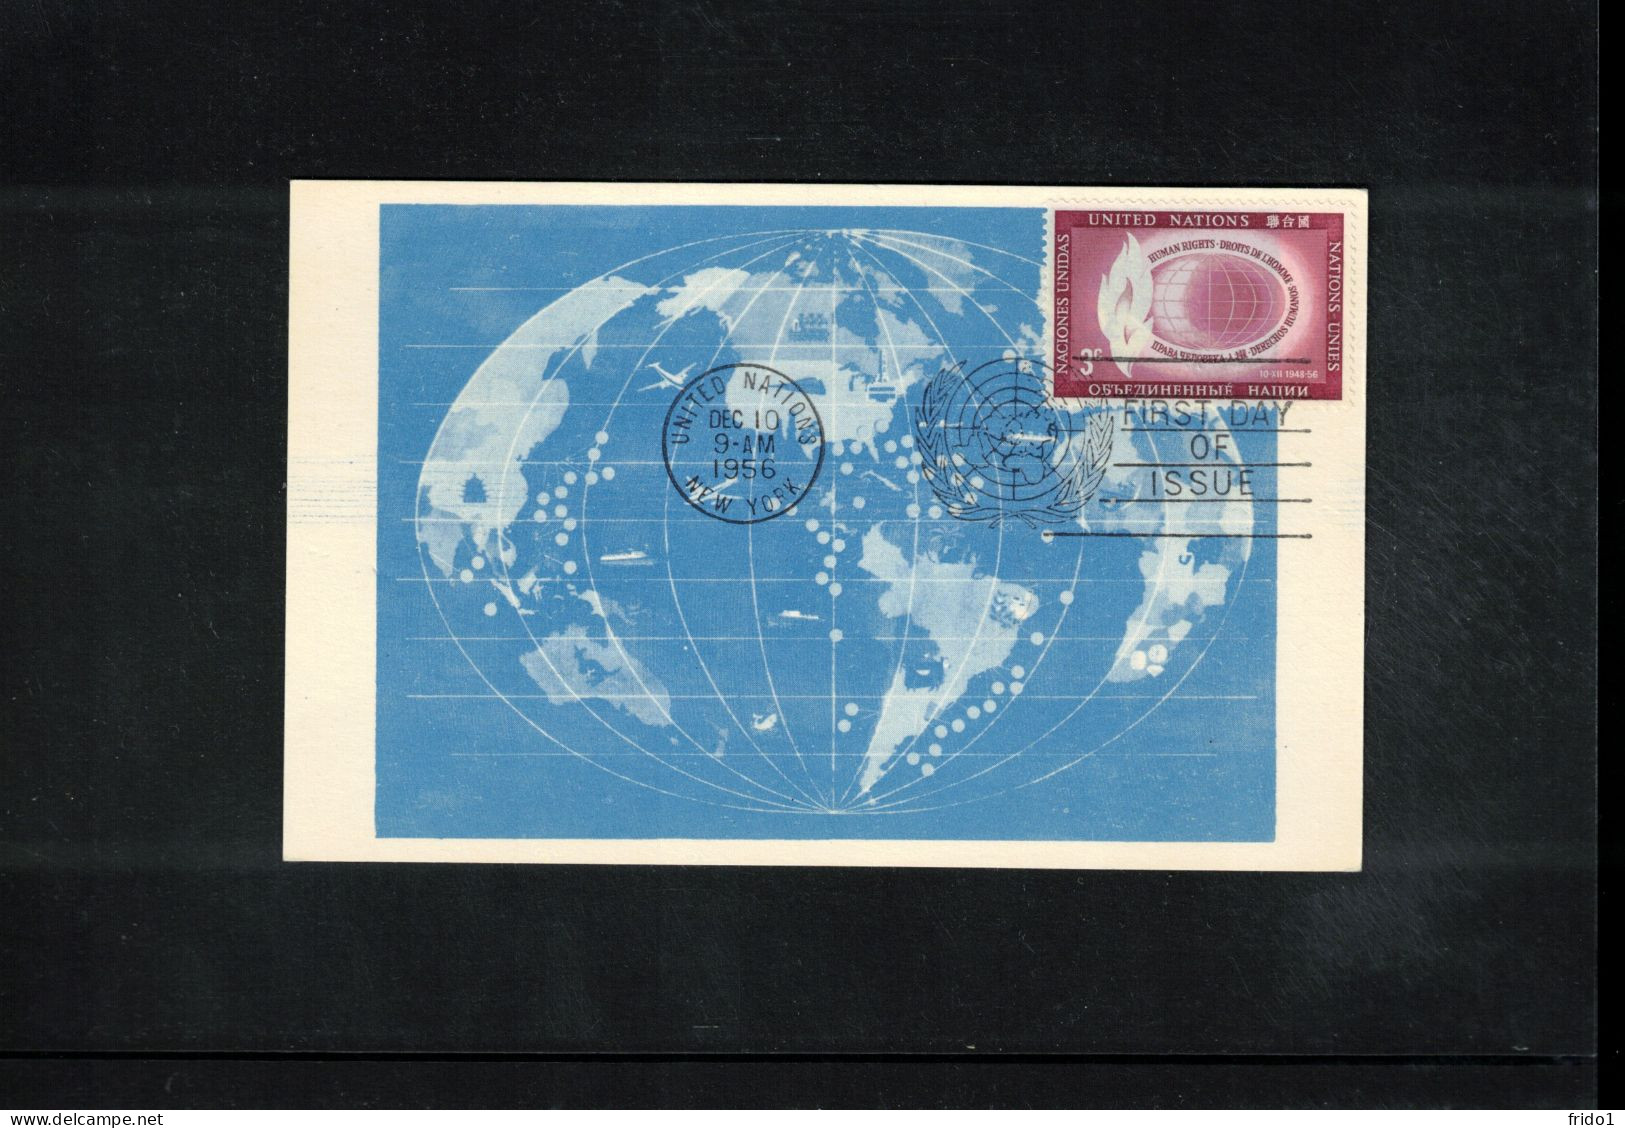 UN New York 1956 Human Rights Day Interesting Maximum Card With First Day Postmark - Maximum Cards